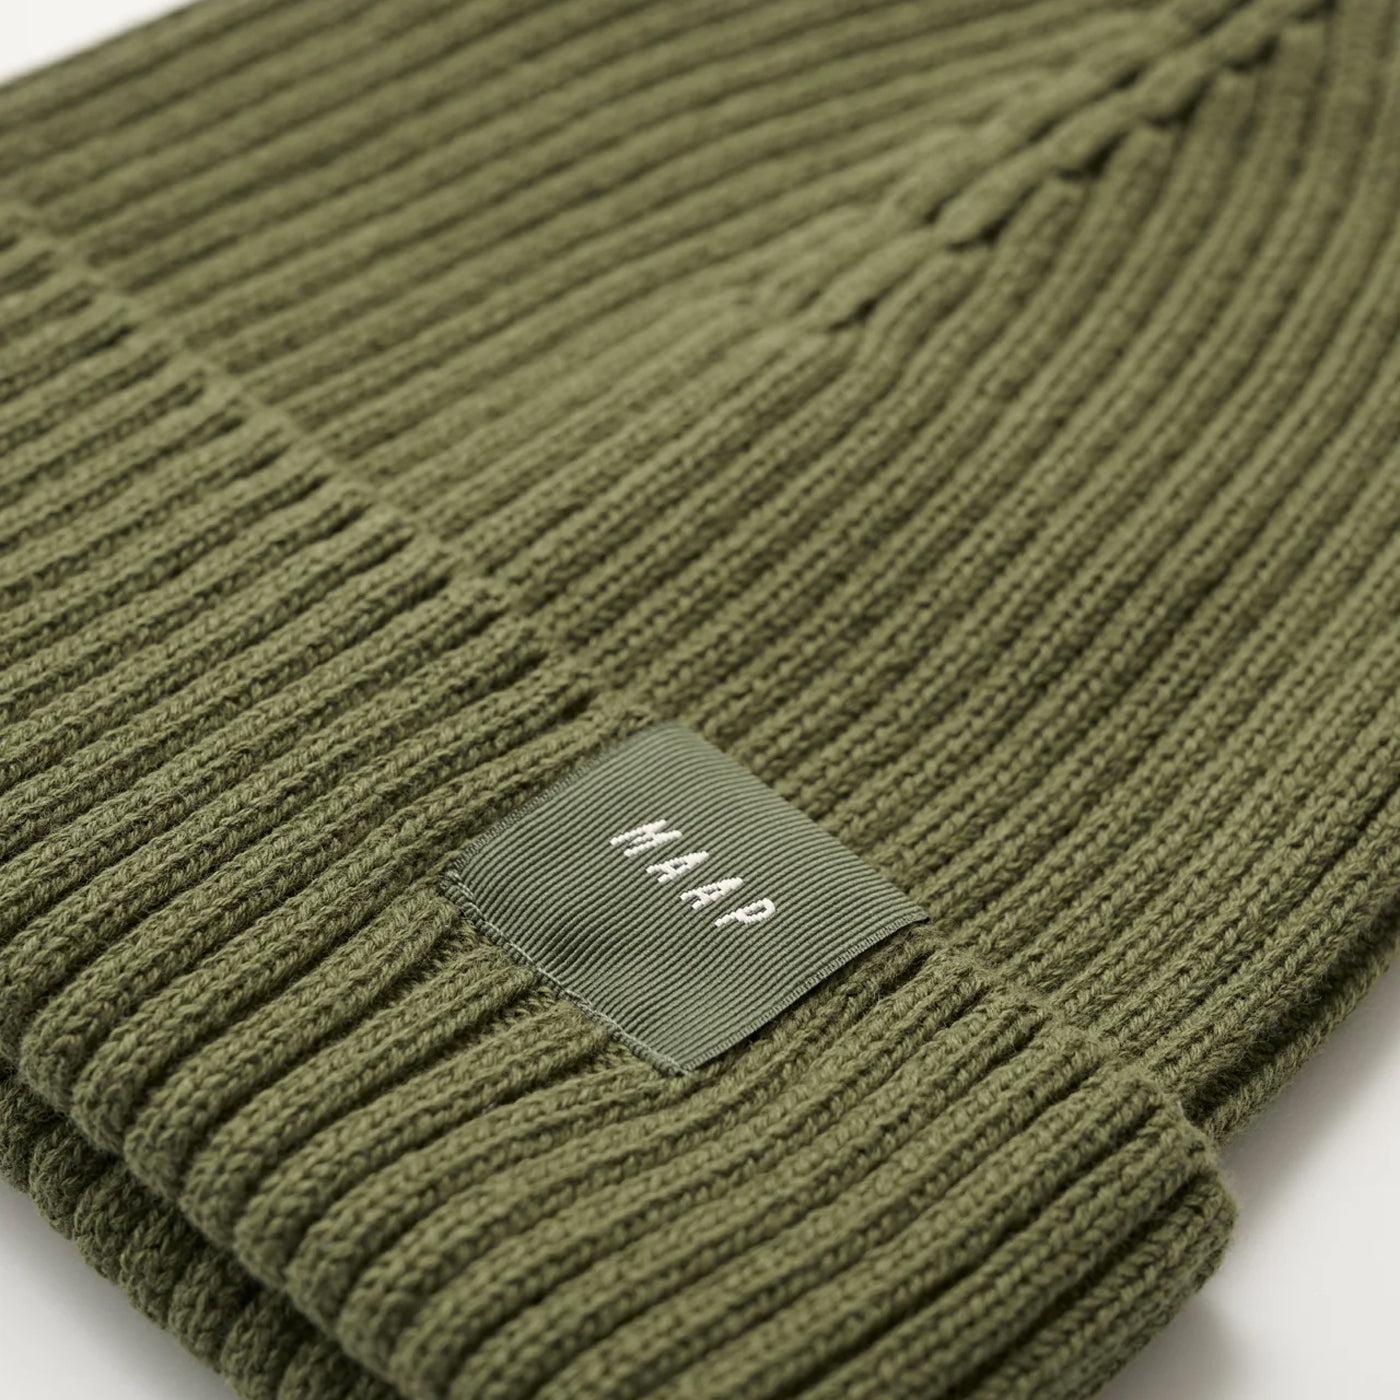 Winter hat Maap Evade 2.0 - Green | All4cycling